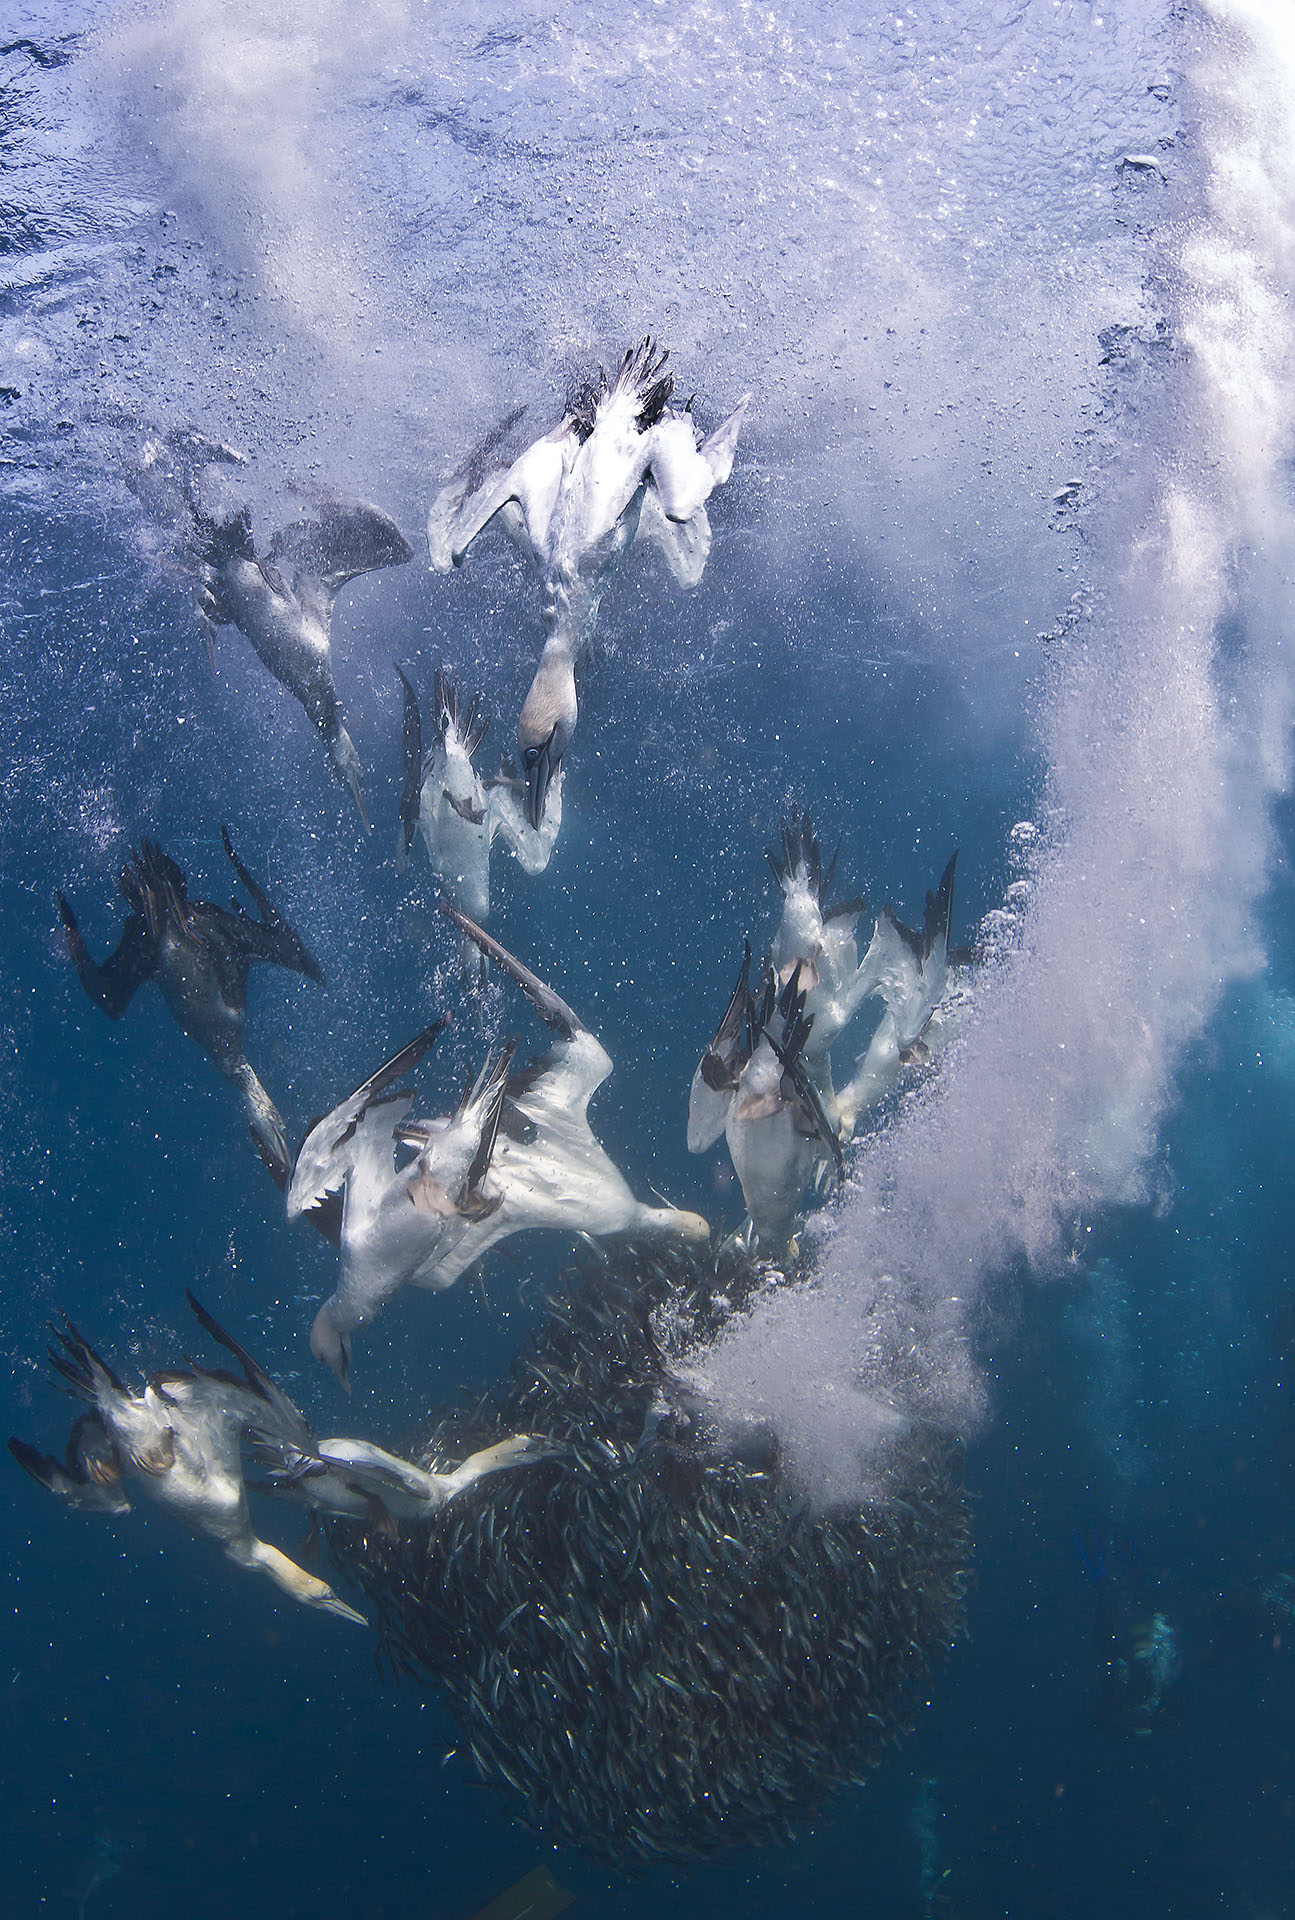 © Allen Walker | Gannet Attack Cape Gannets are supremely adapted to surving on and in the ocean, sometimes diving down up to 15m underwater to feed on bait balls formed by ocean predators like dolphins and sharks.